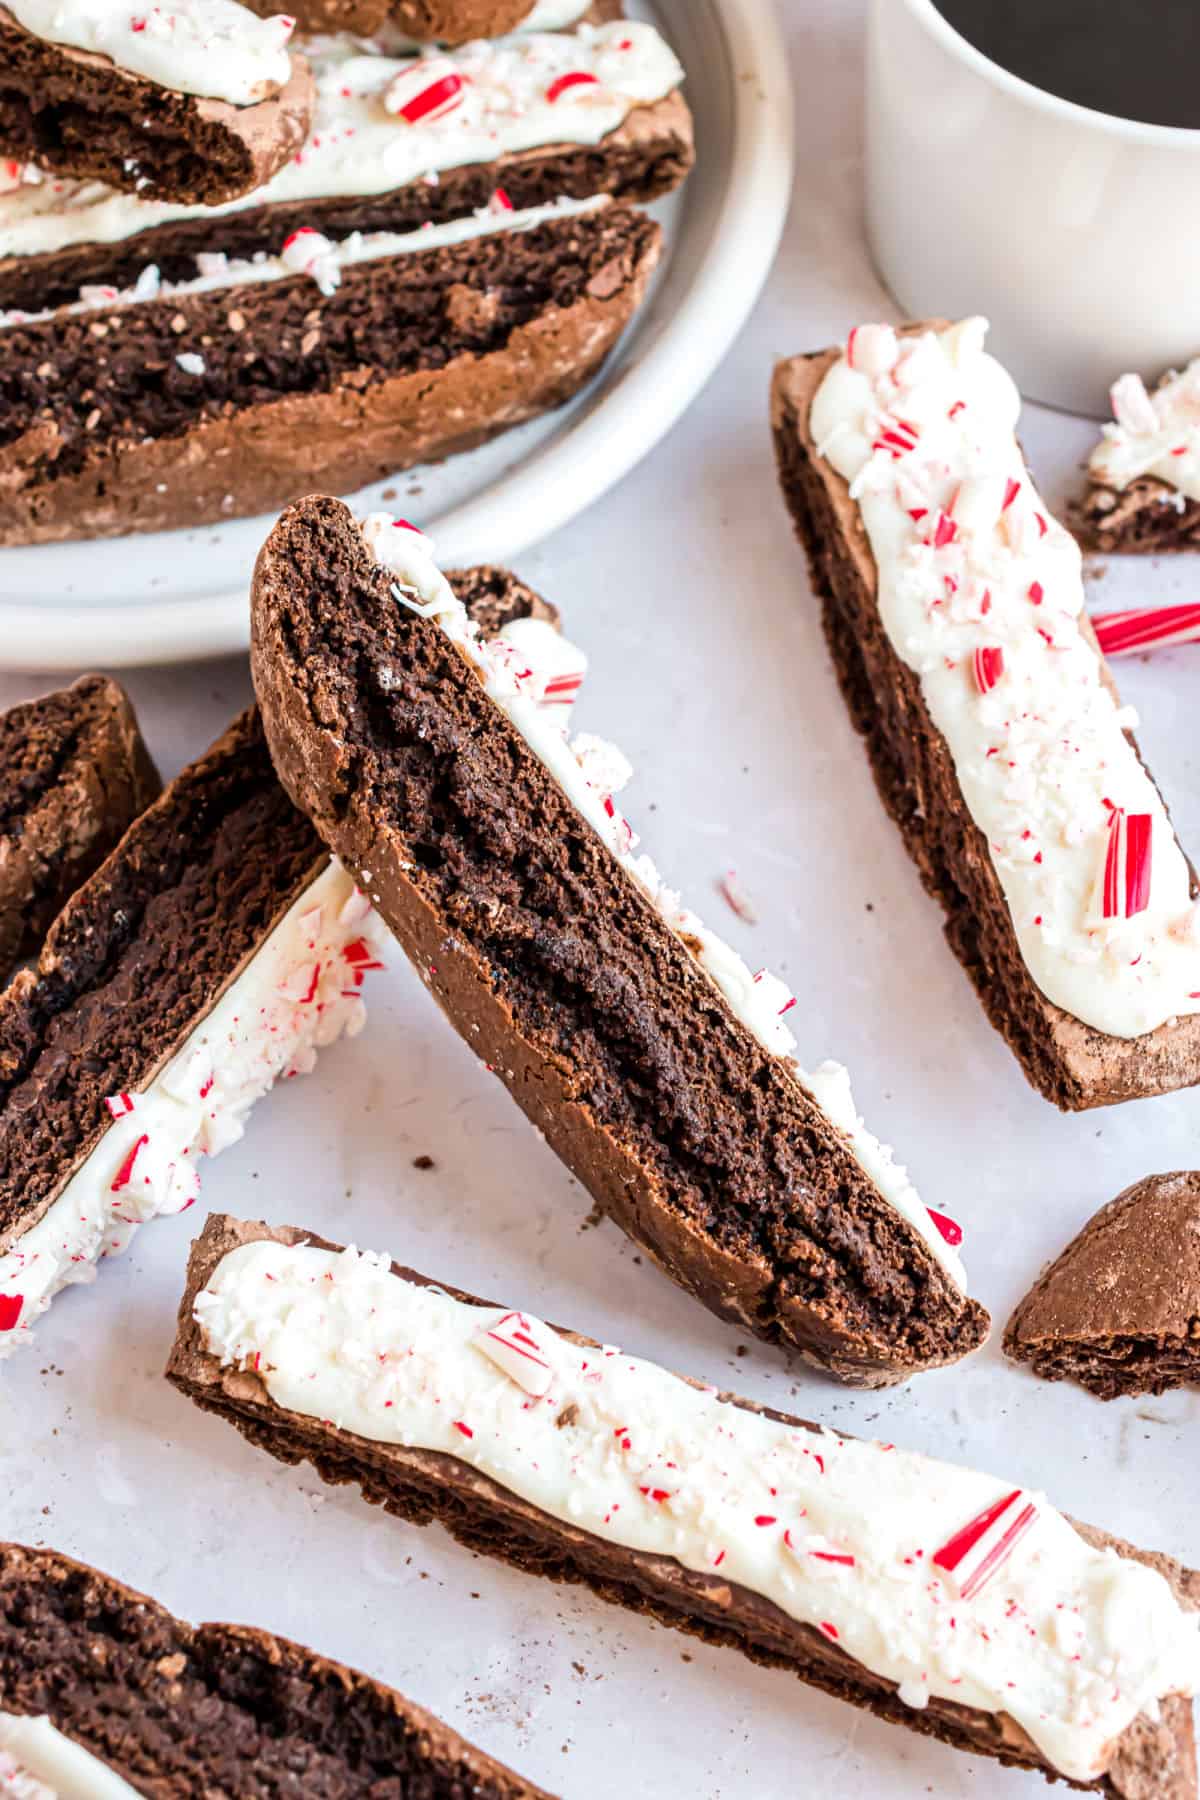 Thick slices of chocolate biscotti dipped in white chocolate and candy canes.